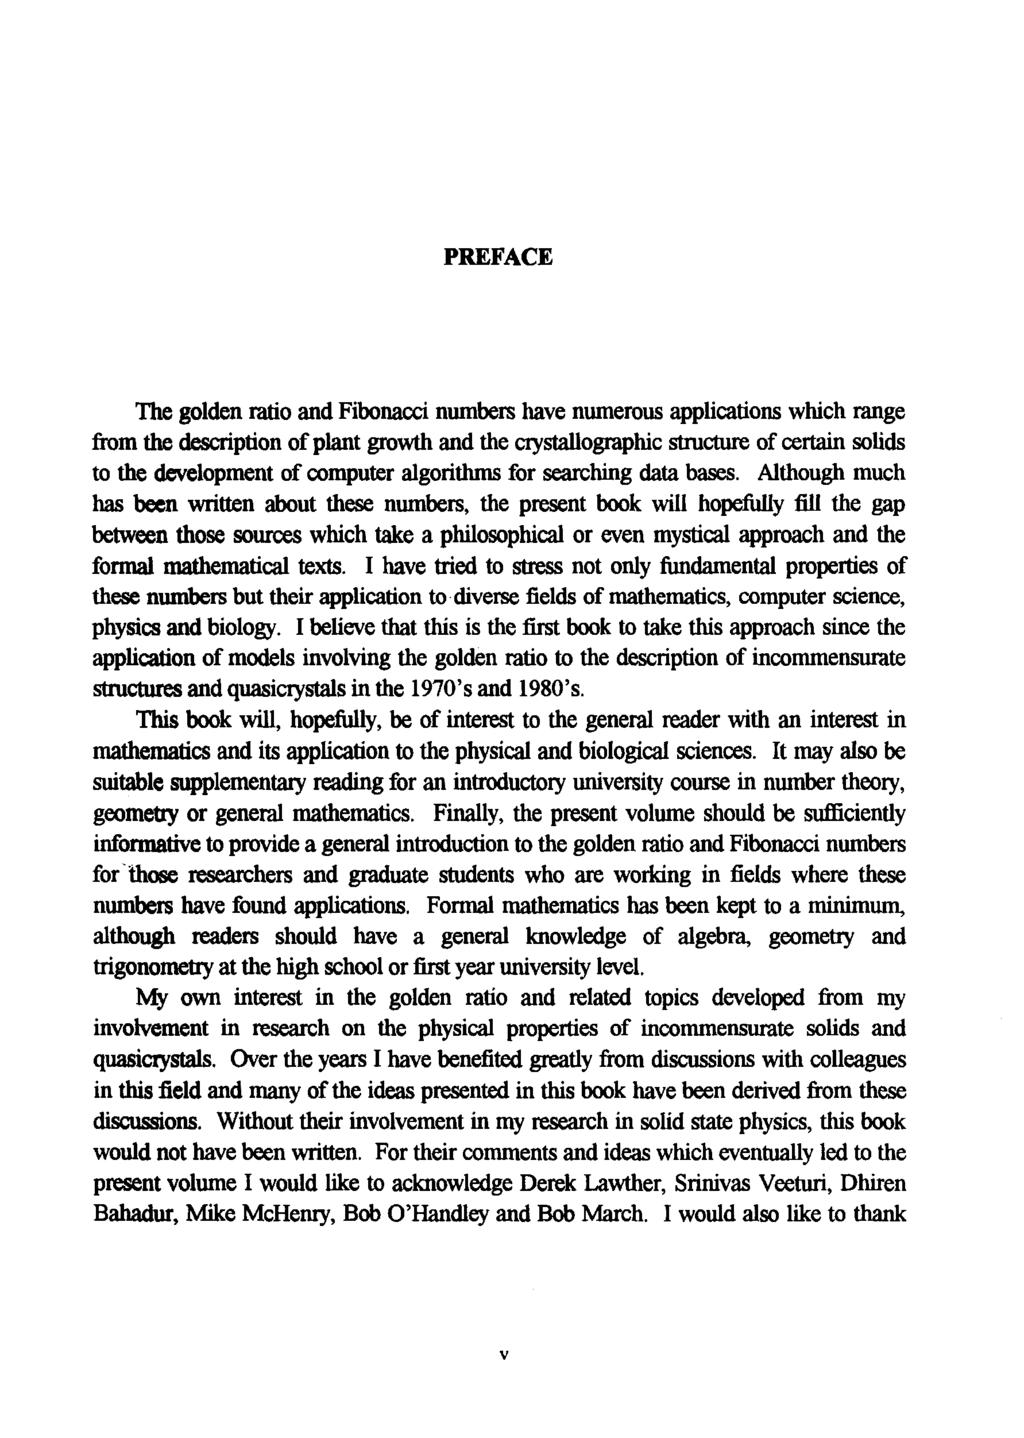 PREFACE The golden ratio and Fibonacci numbers have numerous applications which range from the description of plant growth and the crystallographic structure of certain solids to the development of